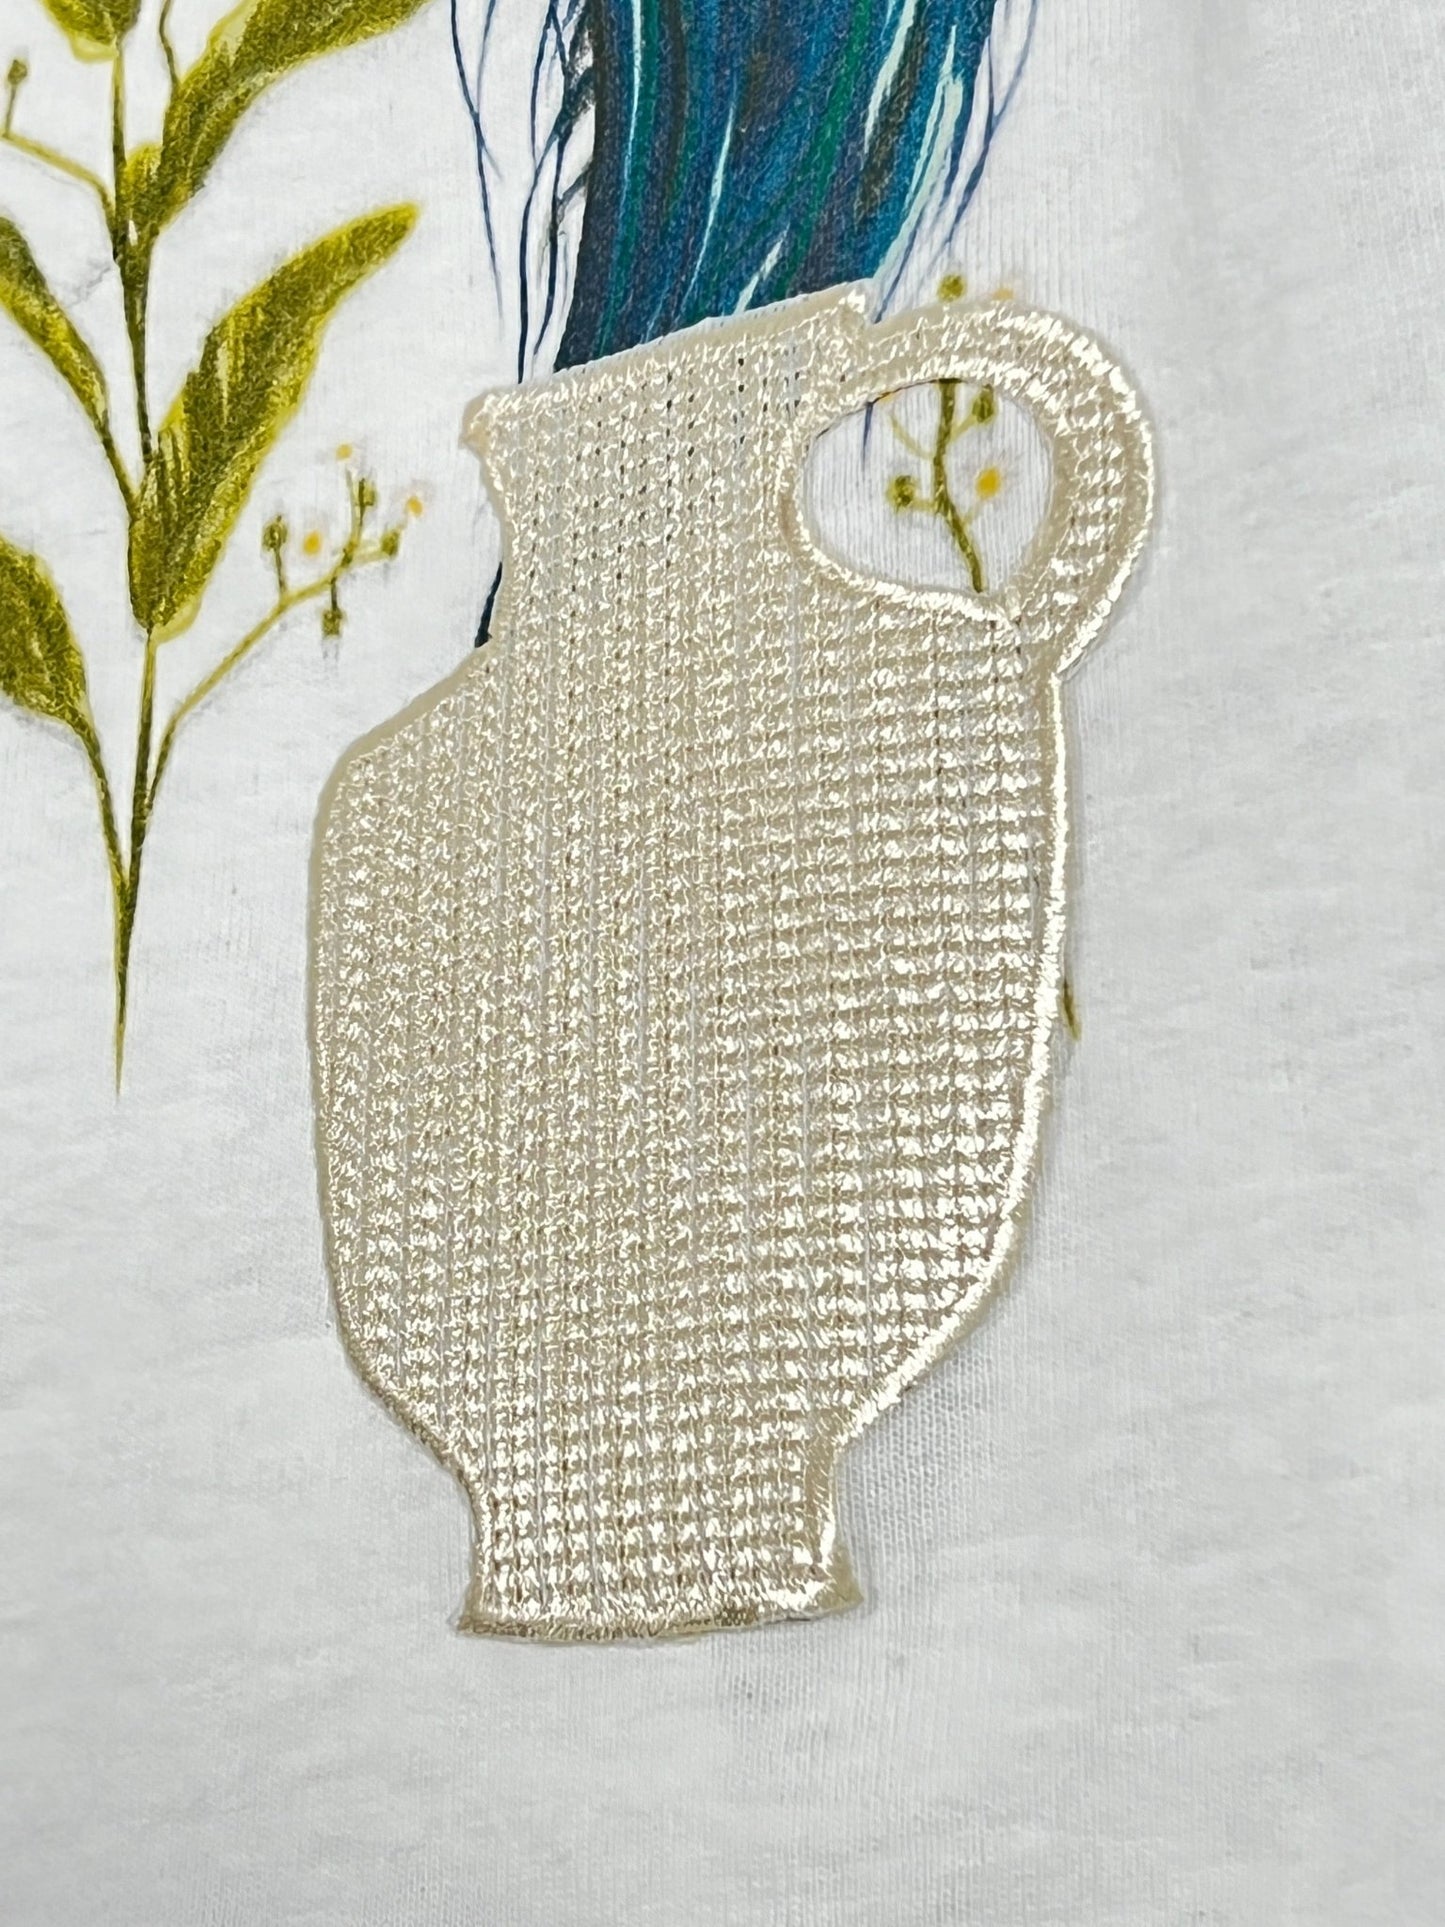 A textured, woven pitcher design in beige is displayed against a white background with large green plant illustrations, featuring the AL AIN AMHX S121 PEACOCK BLANC by AL AIN.